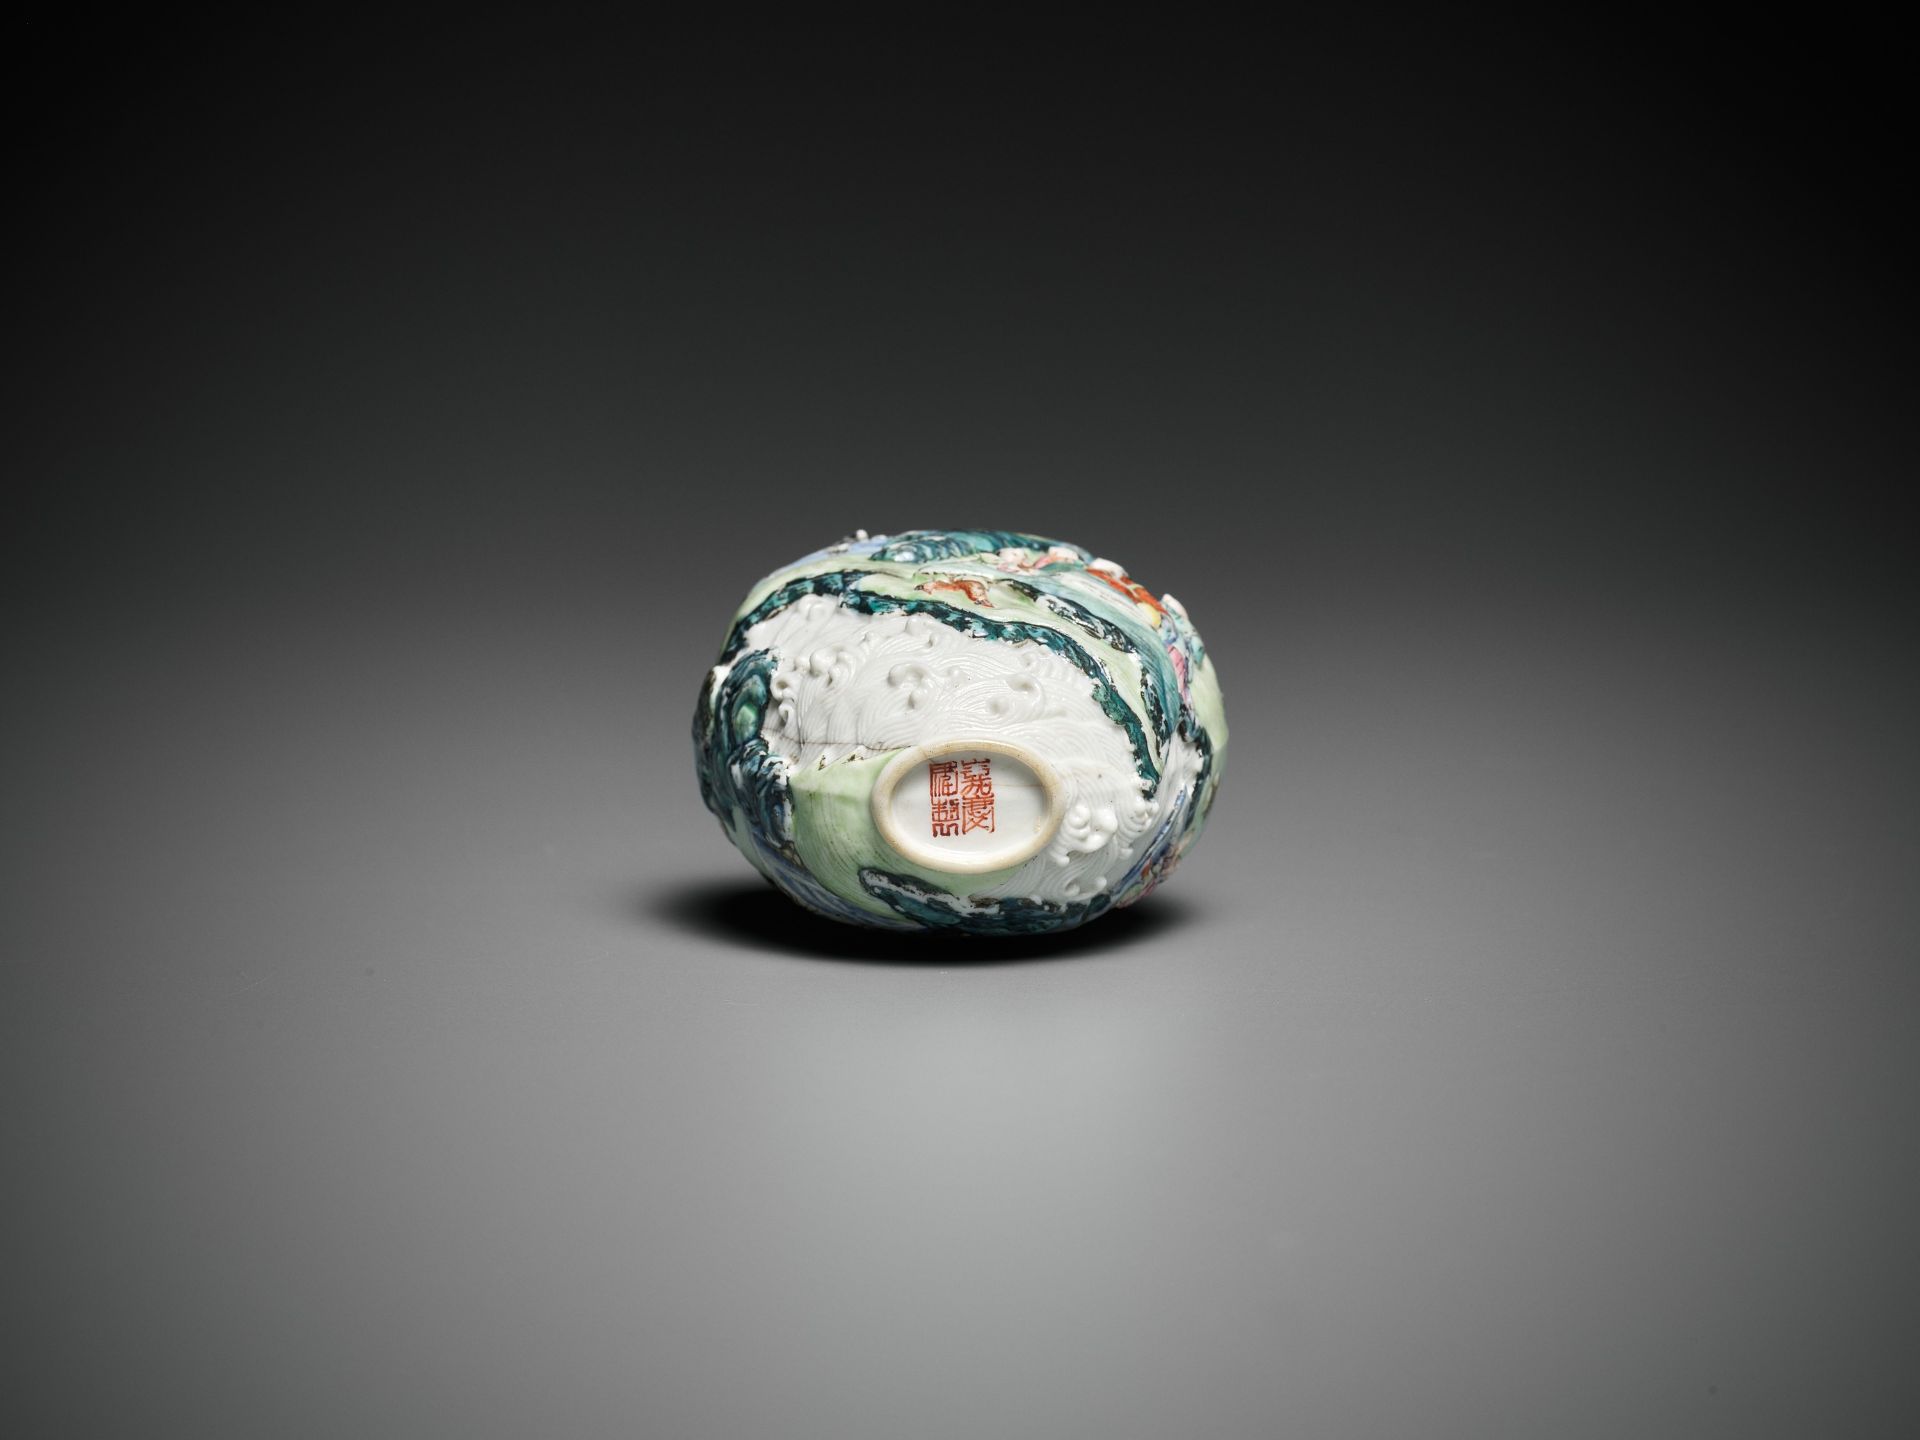 AN IMPERIAL MOLDED AND ENAMELED PORCELAIN SNUFF BOTTLE, JIAQING MARK AND PERIOD - Image 8 of 8